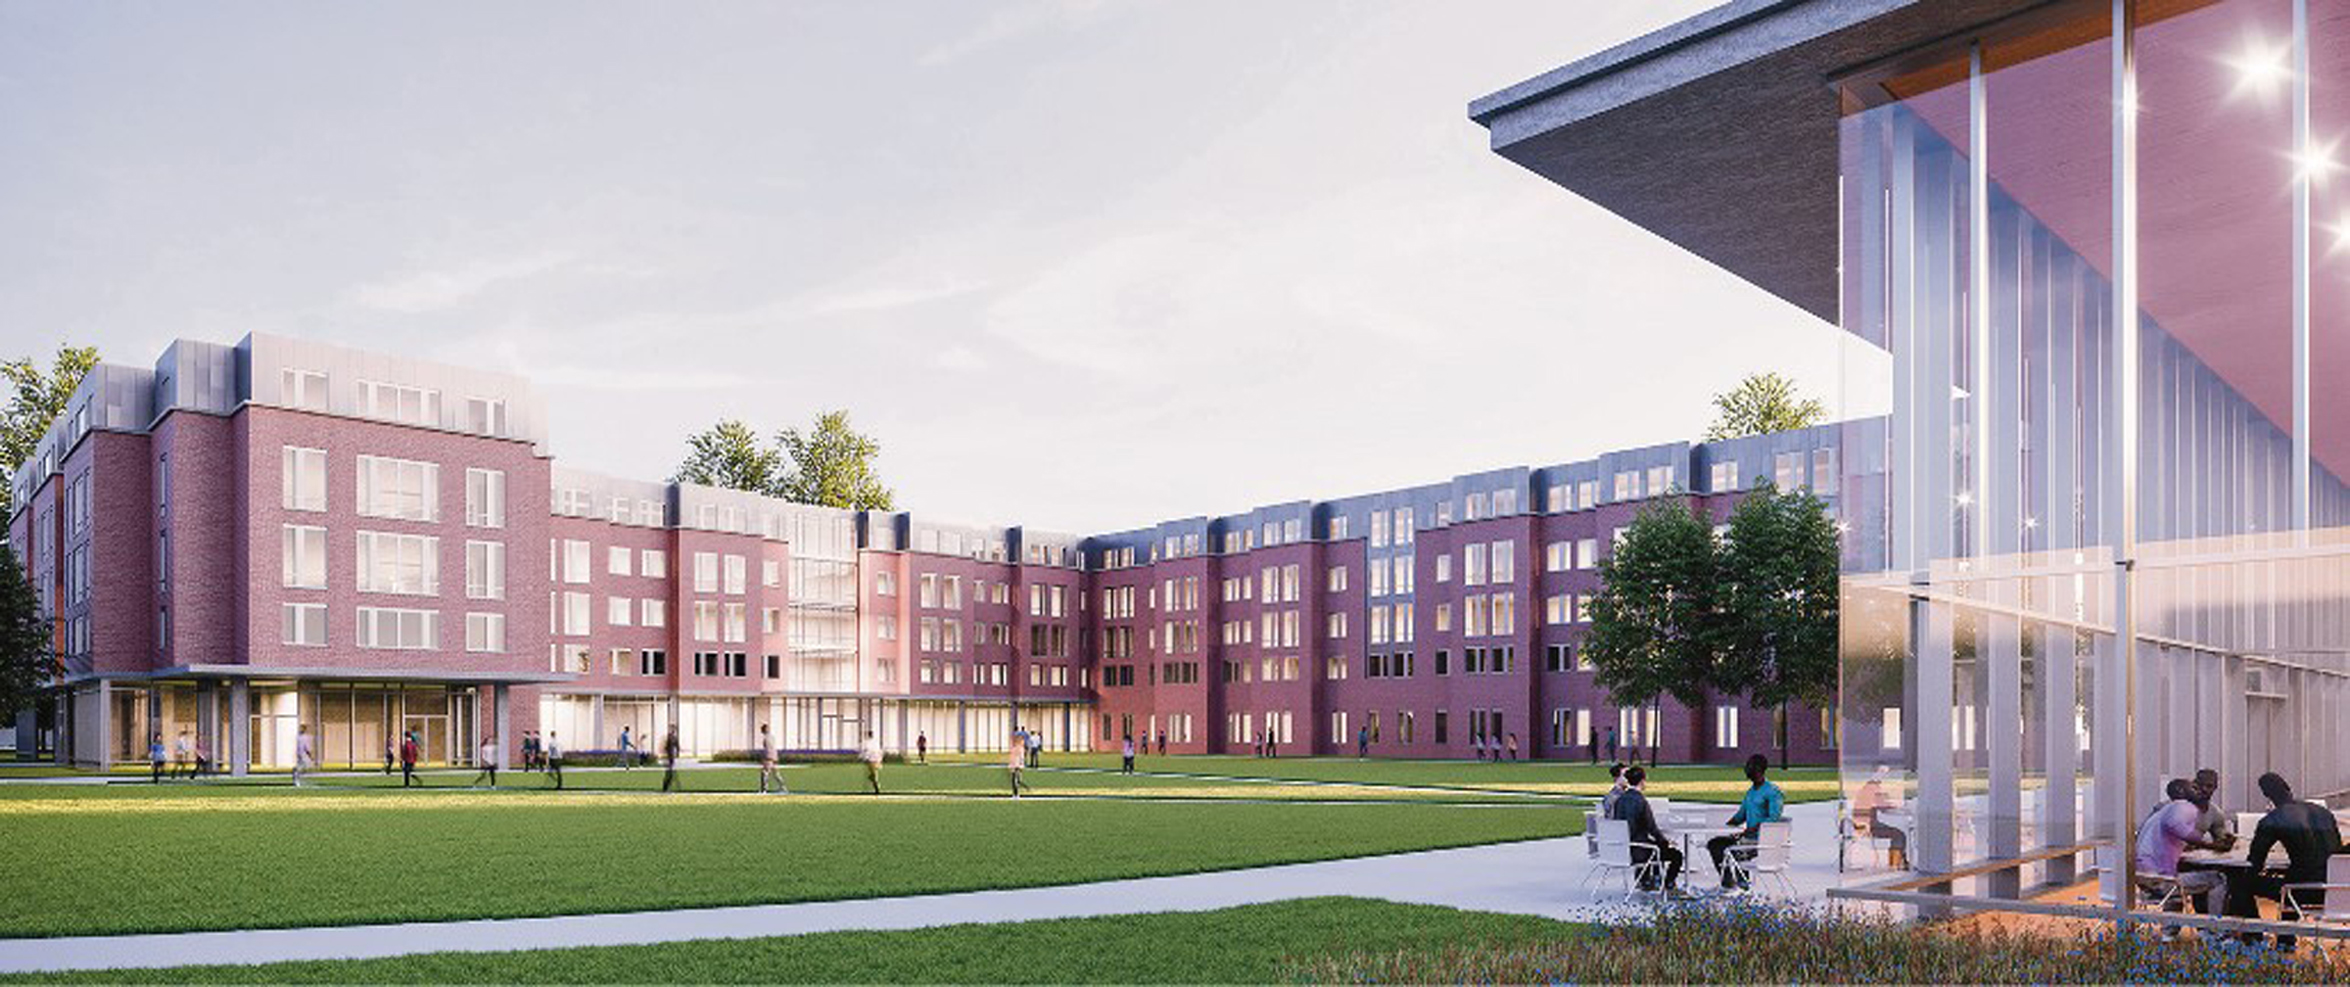 The planned new residence hall will house as many as 600 students.